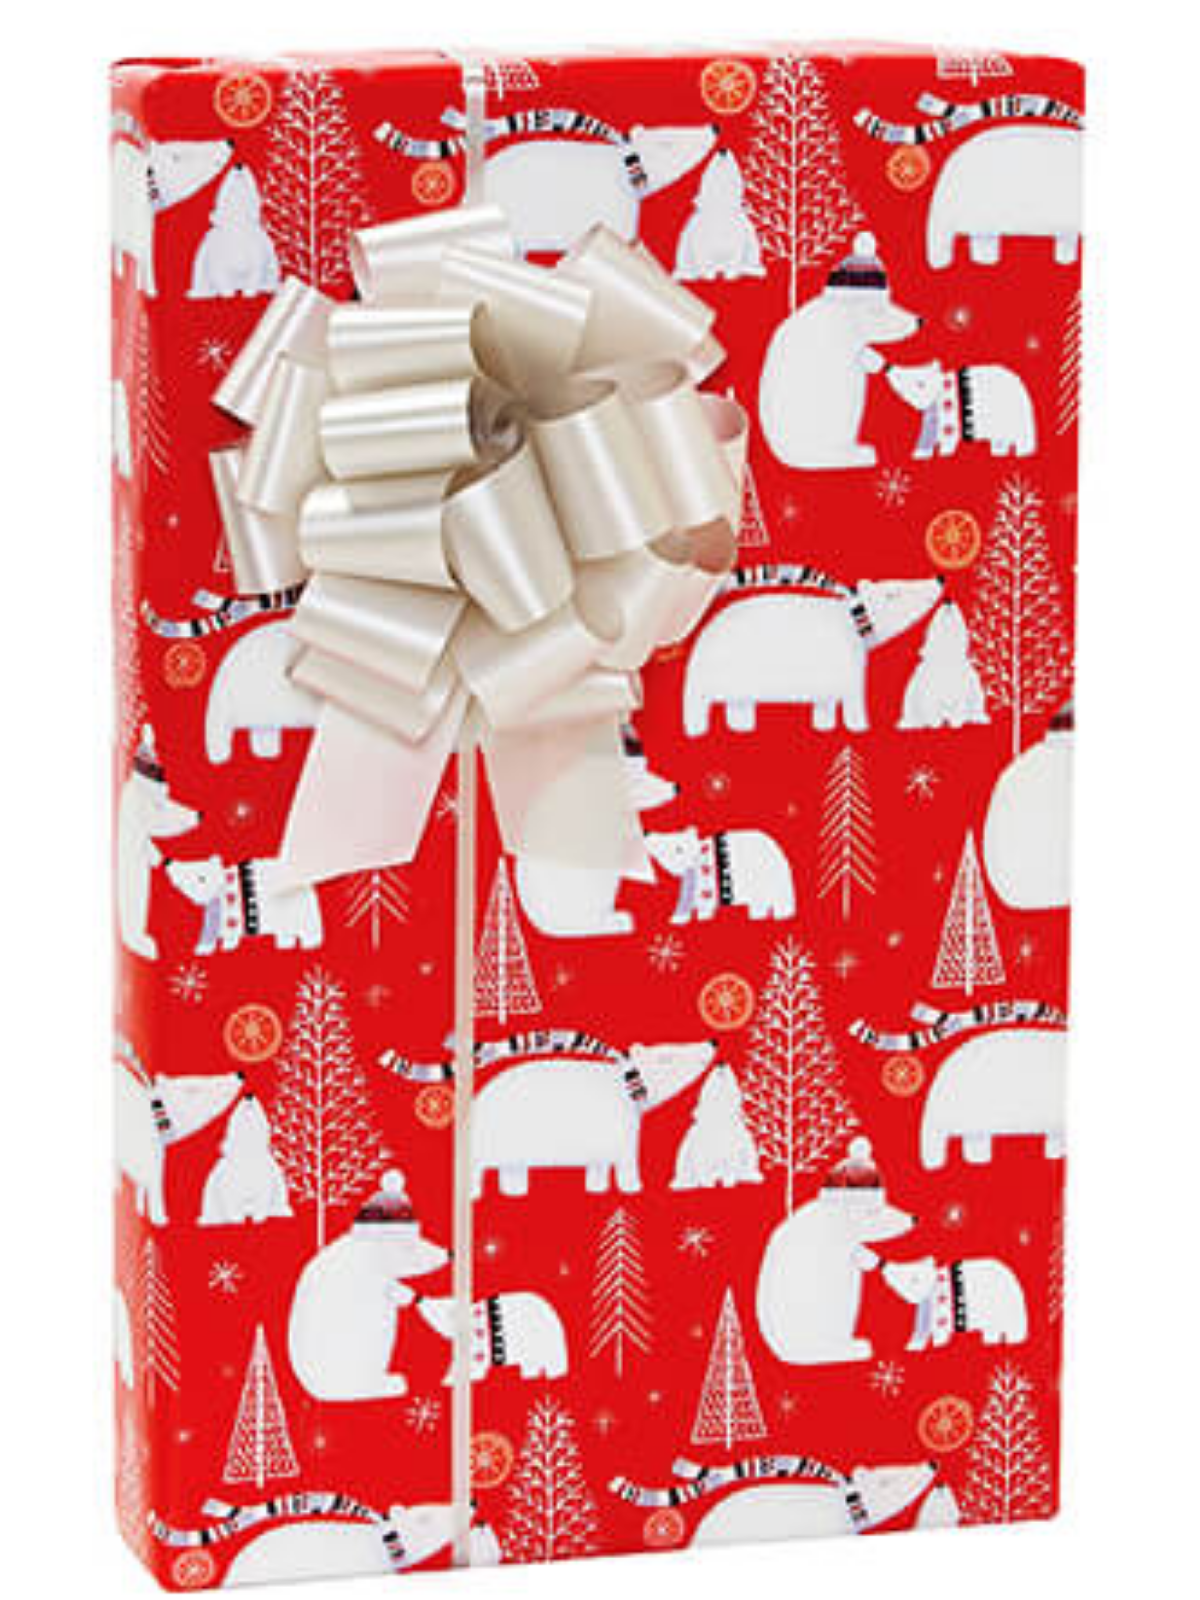 Red and White Polar Bear Holiday Christmas Gift Premium Wrapping Paper 15ft